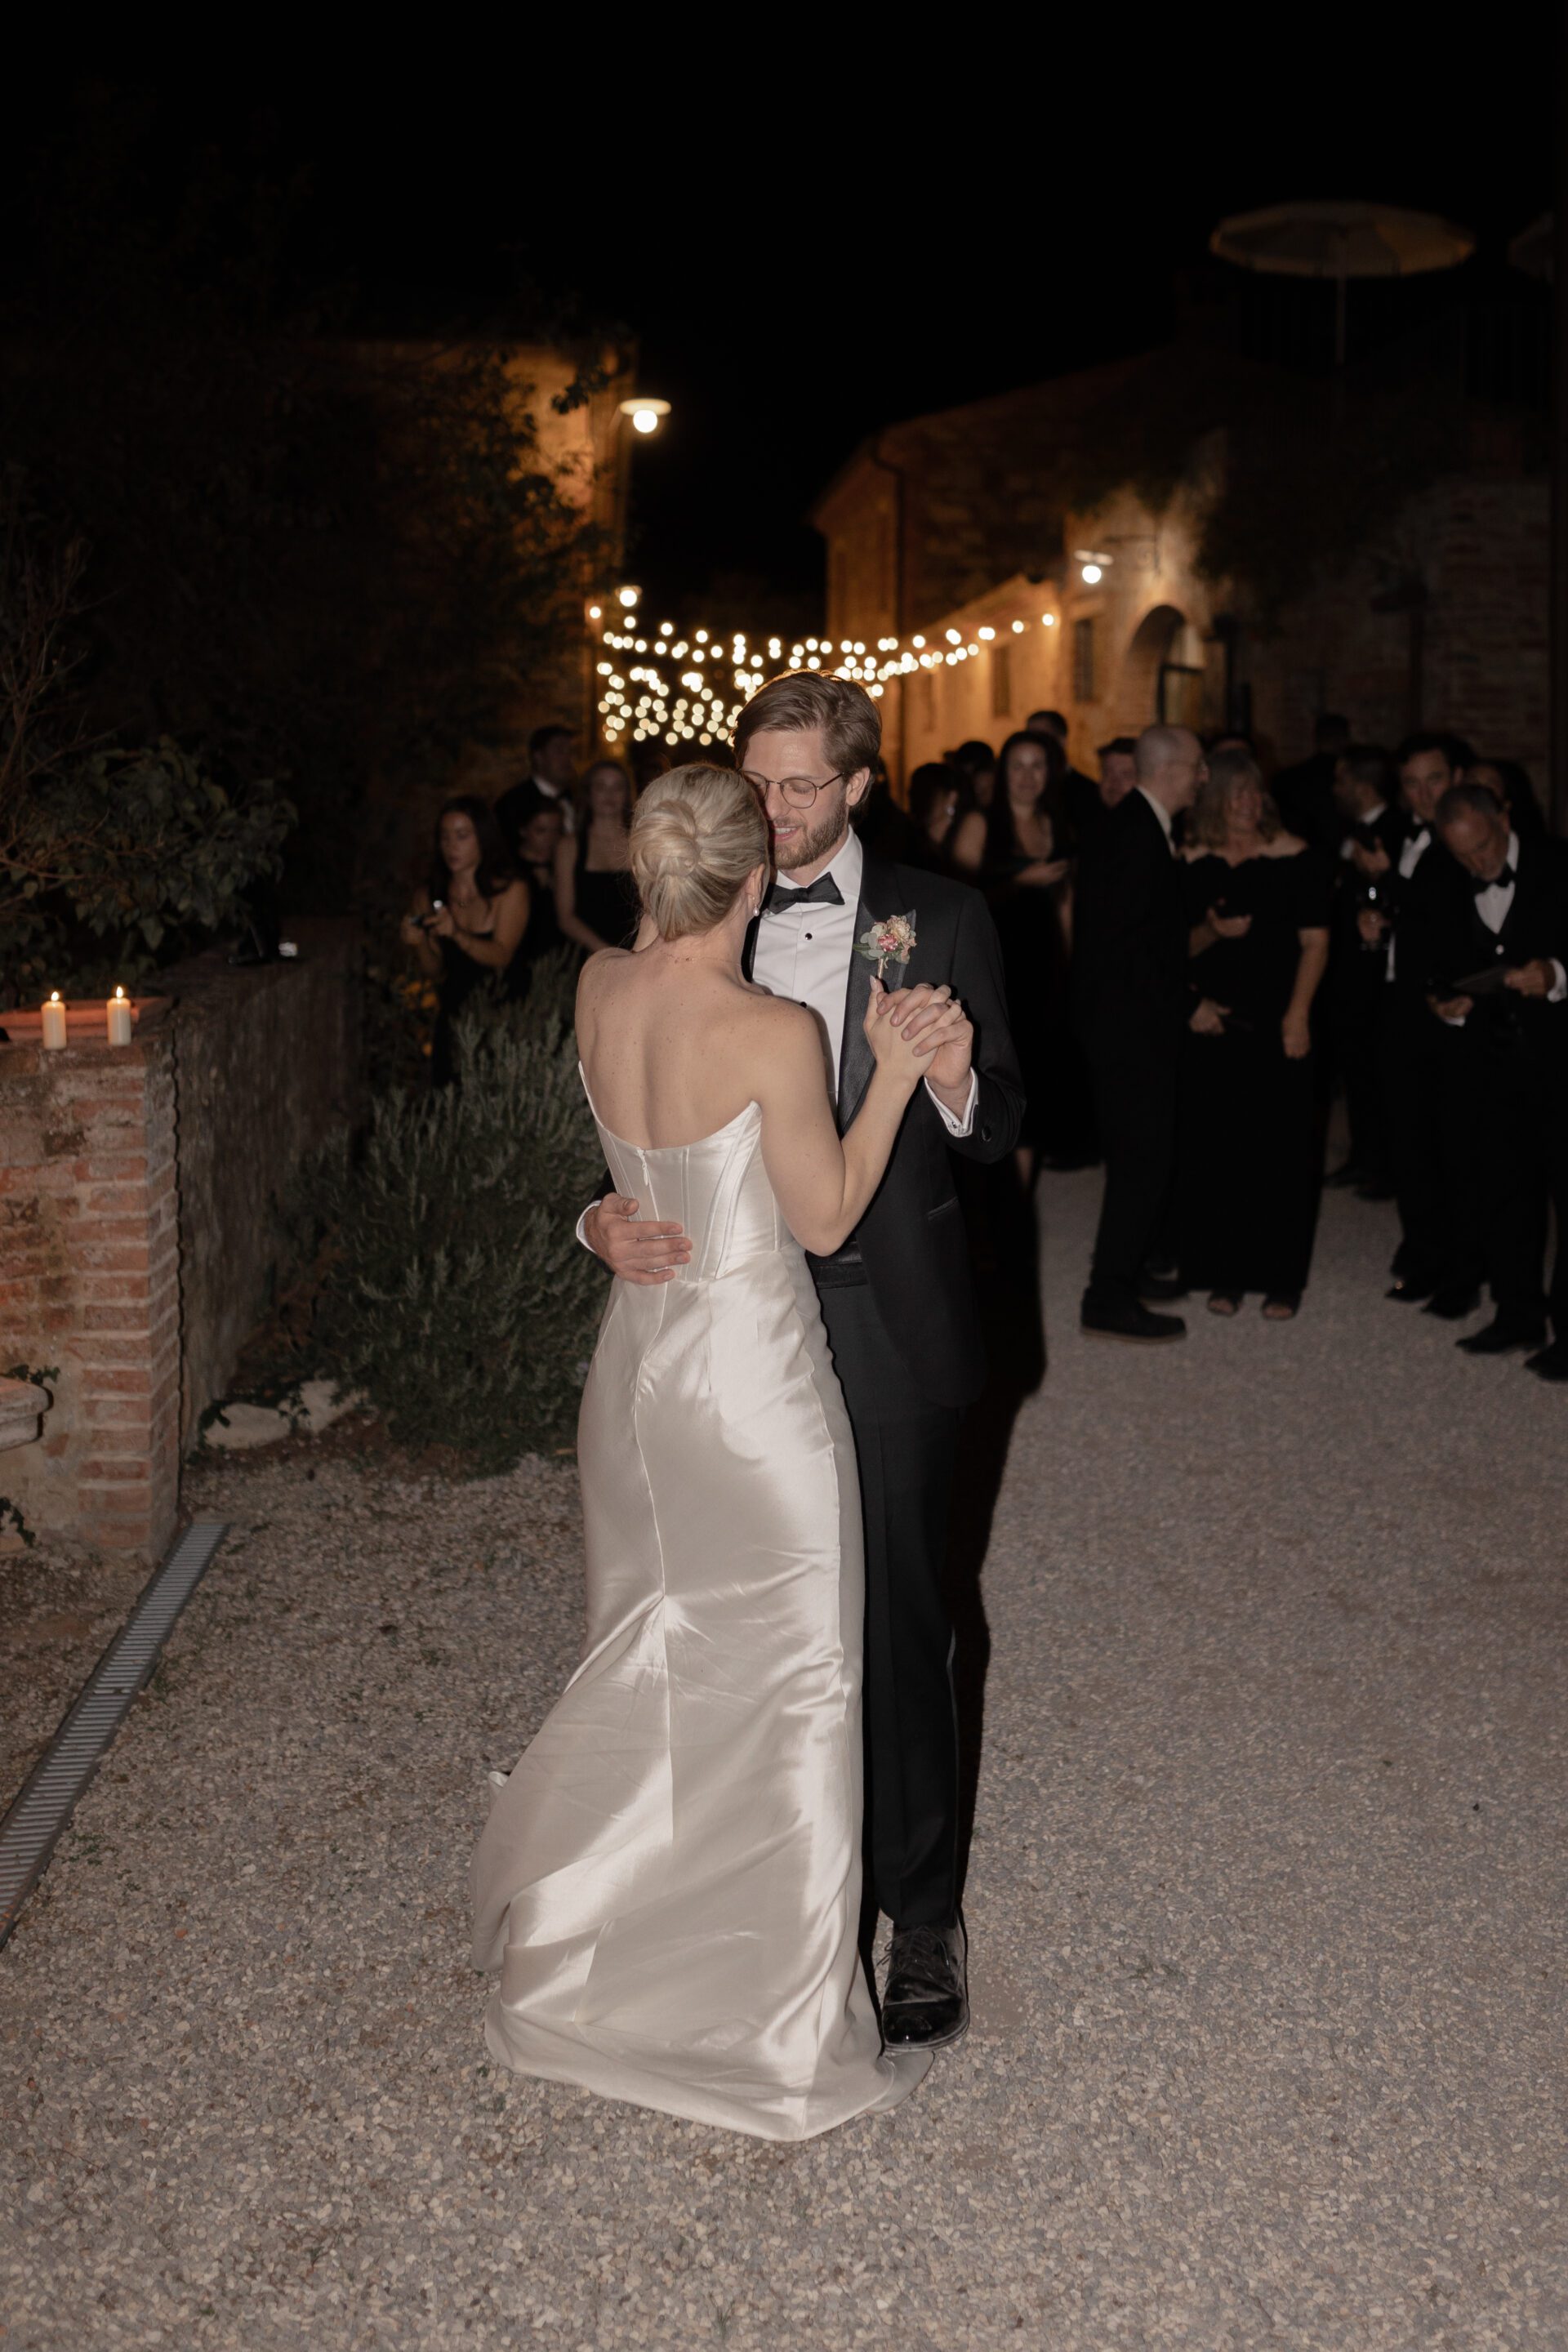 The bride and groom share their first dance in the Tuscan wedding venue courtyard surrounded by lights and candles